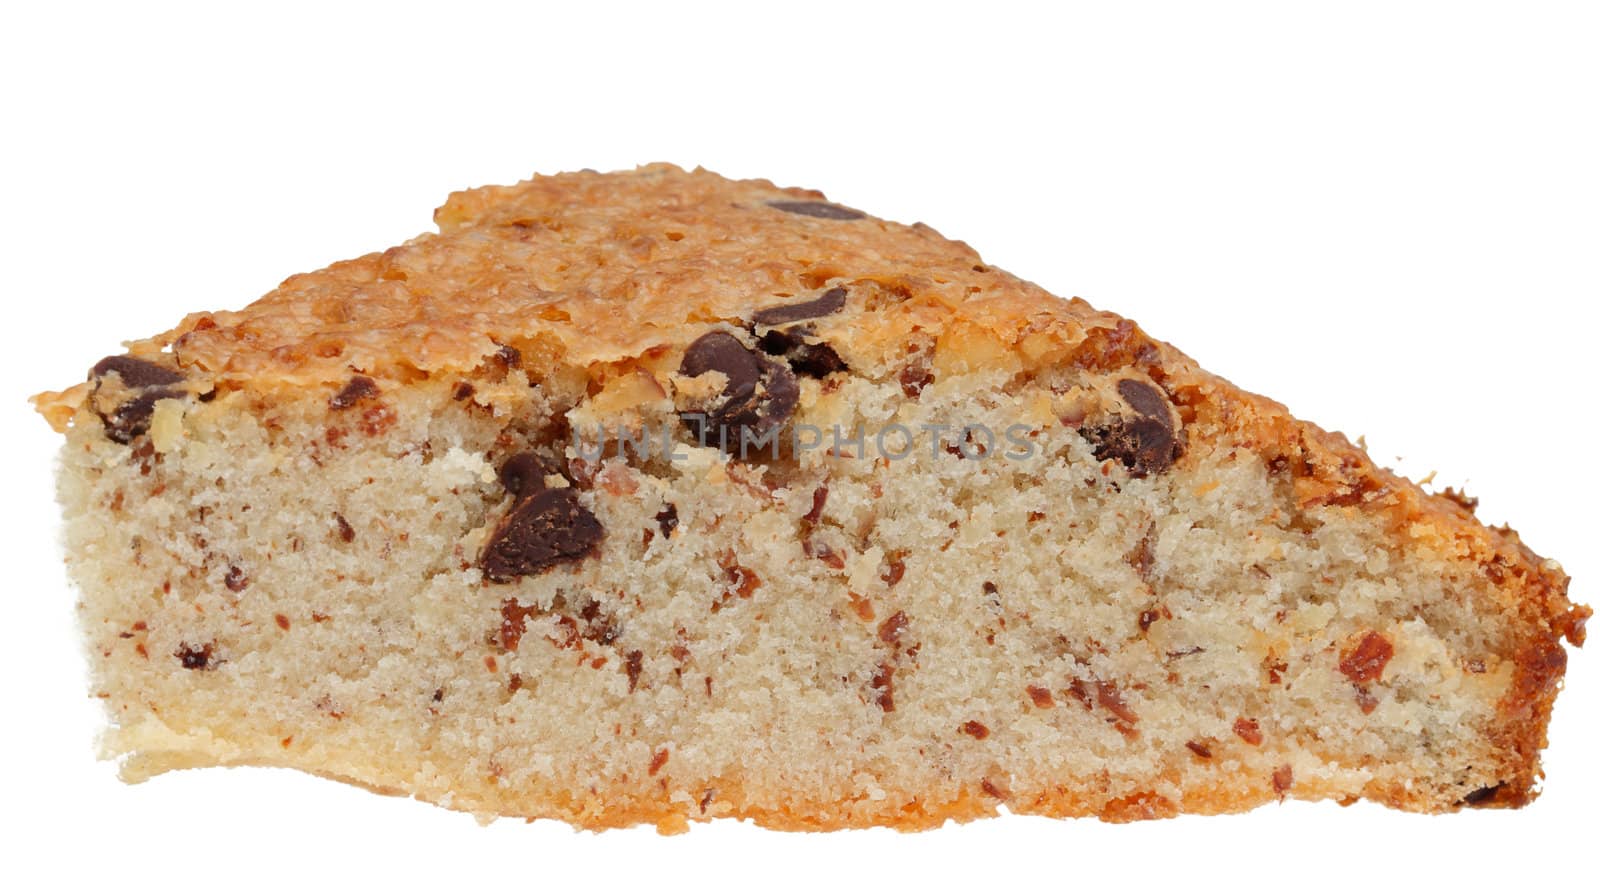 Close-up image of a tasty piece of cake with chocolate isolated against a white background.